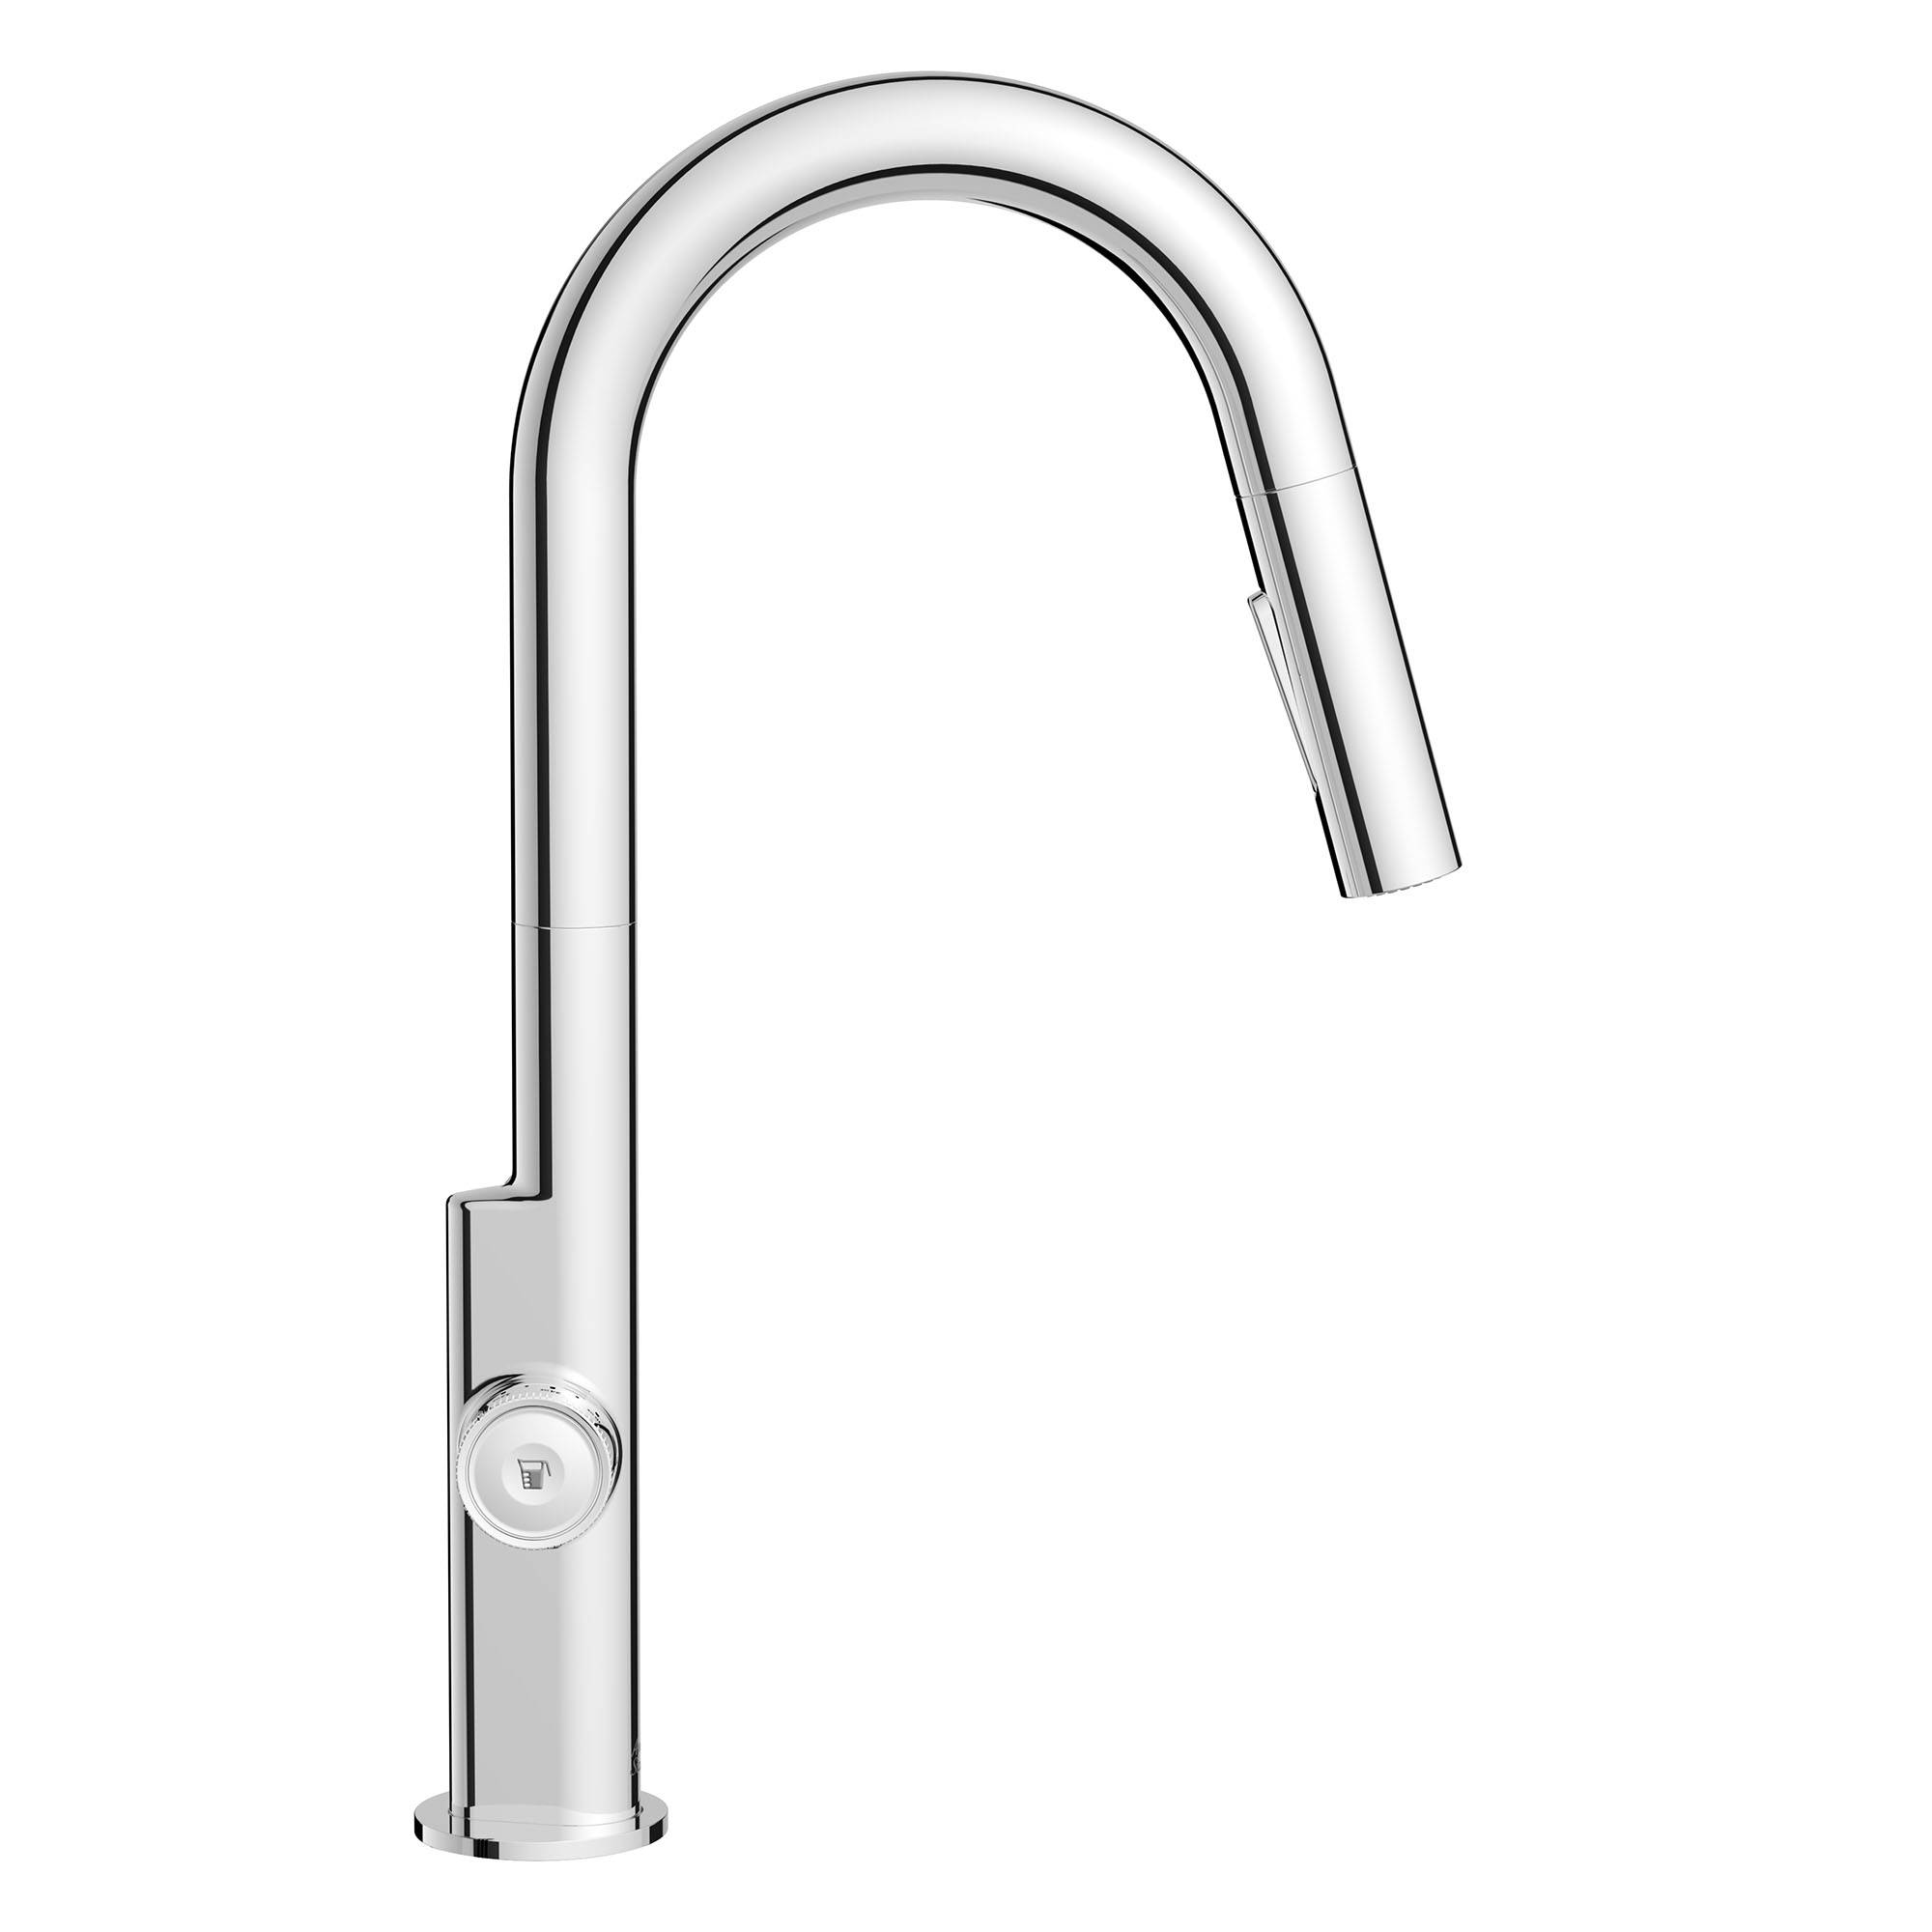 Beale MeasureFill™ 2-Handle Pull-Down Dual Spray Kitchen Faucet 1.5 gpm/5.7 L/min With MeasureFill™ Dial